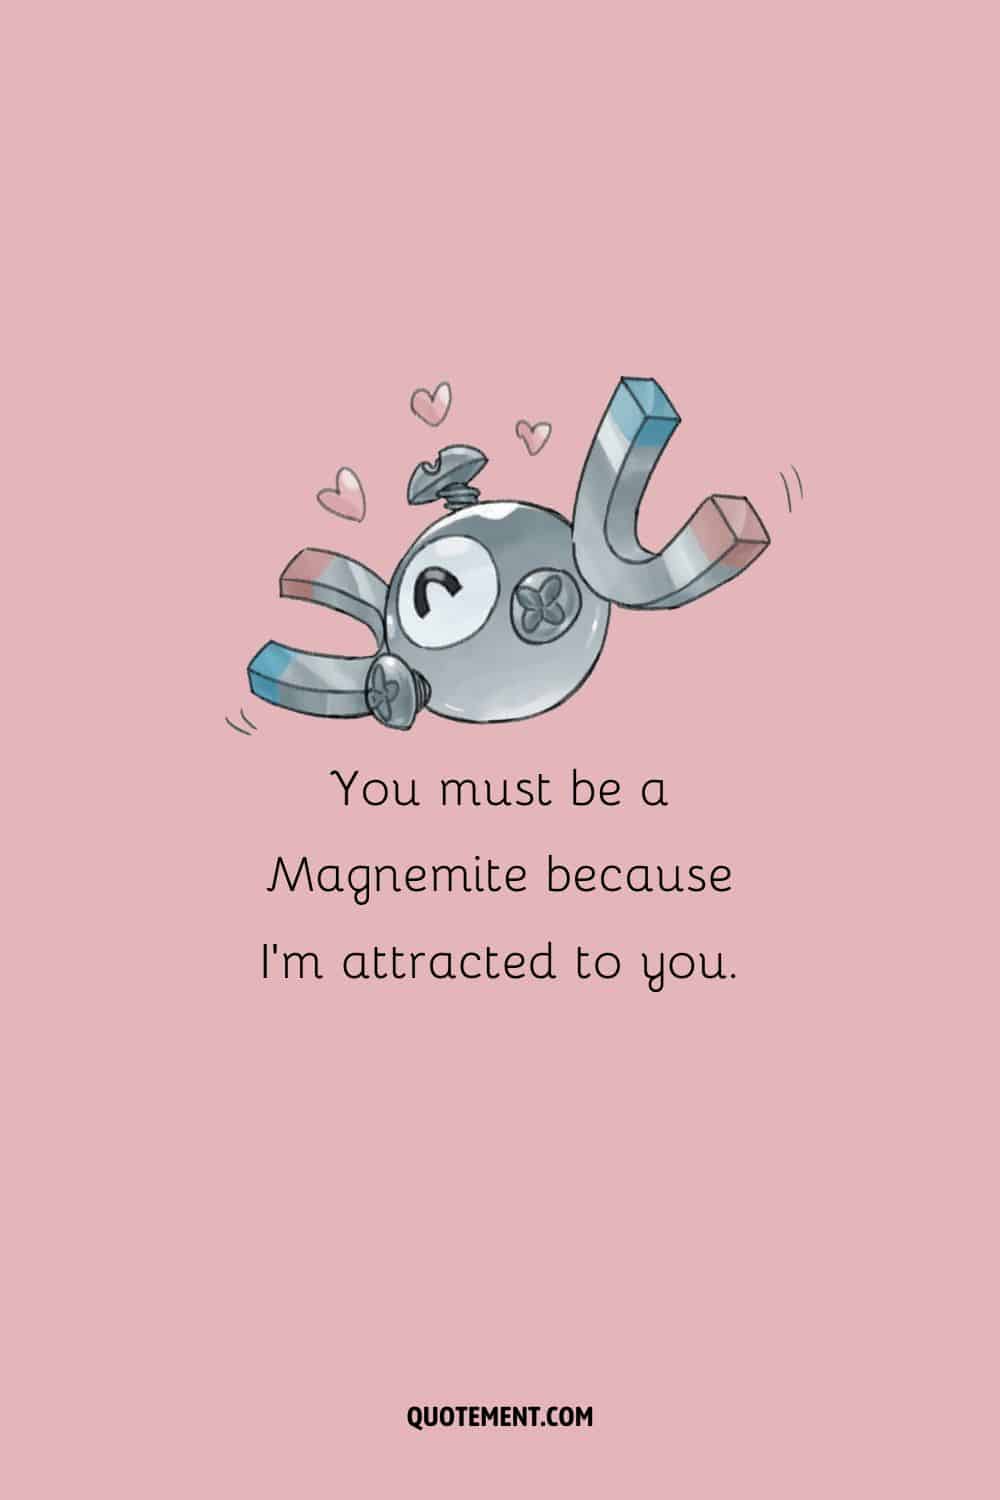 Pick up line and the image of Magnemite